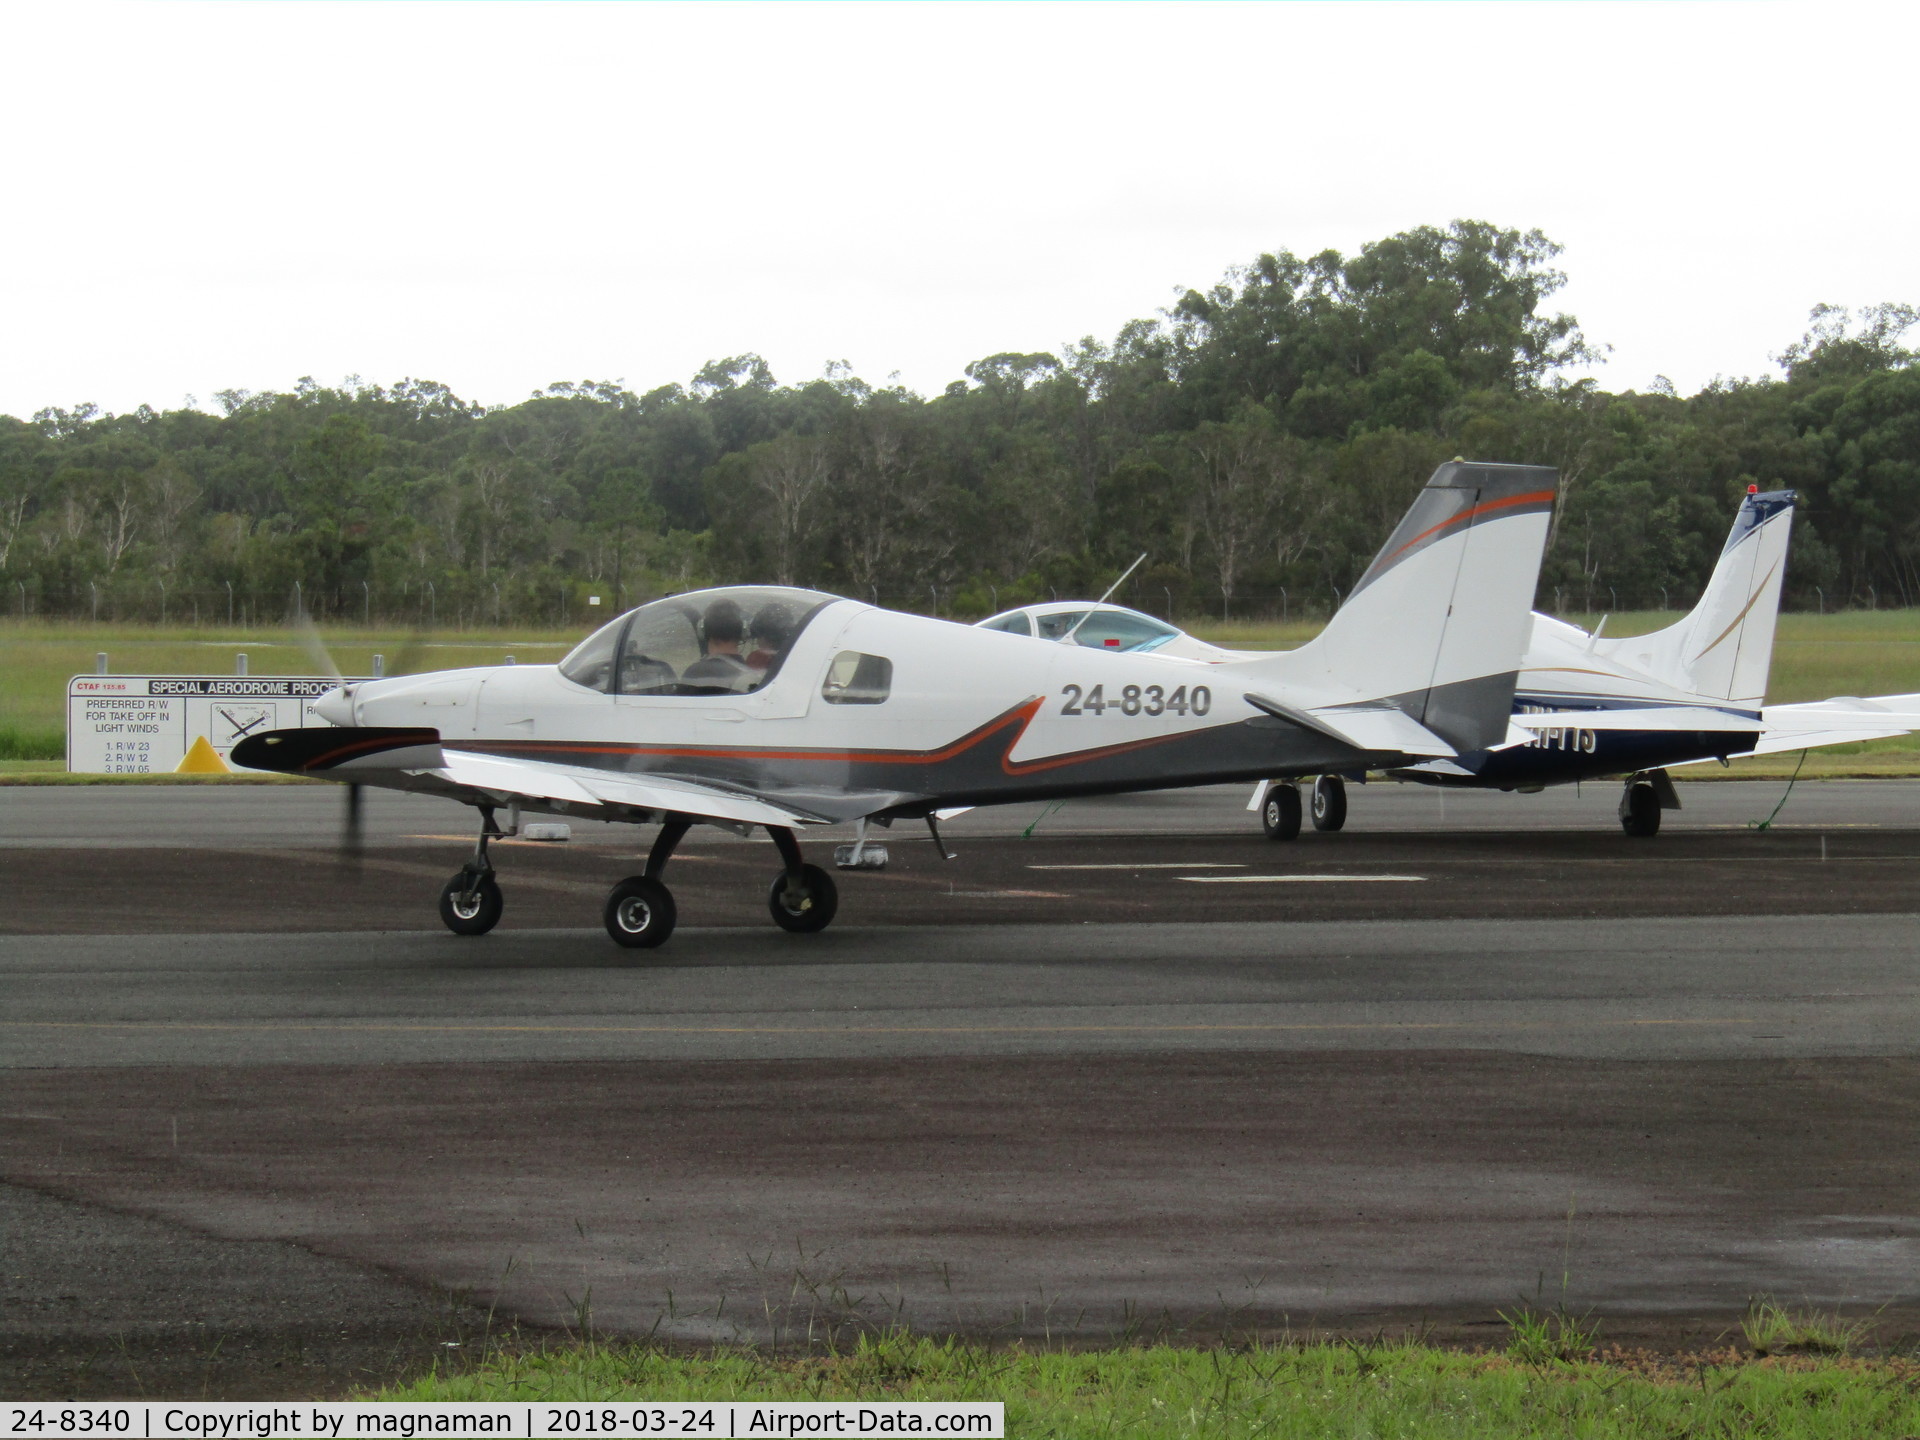 24-8340, The Airplane Factory Sling 2 C/N 126, leaving caloundra in the rain